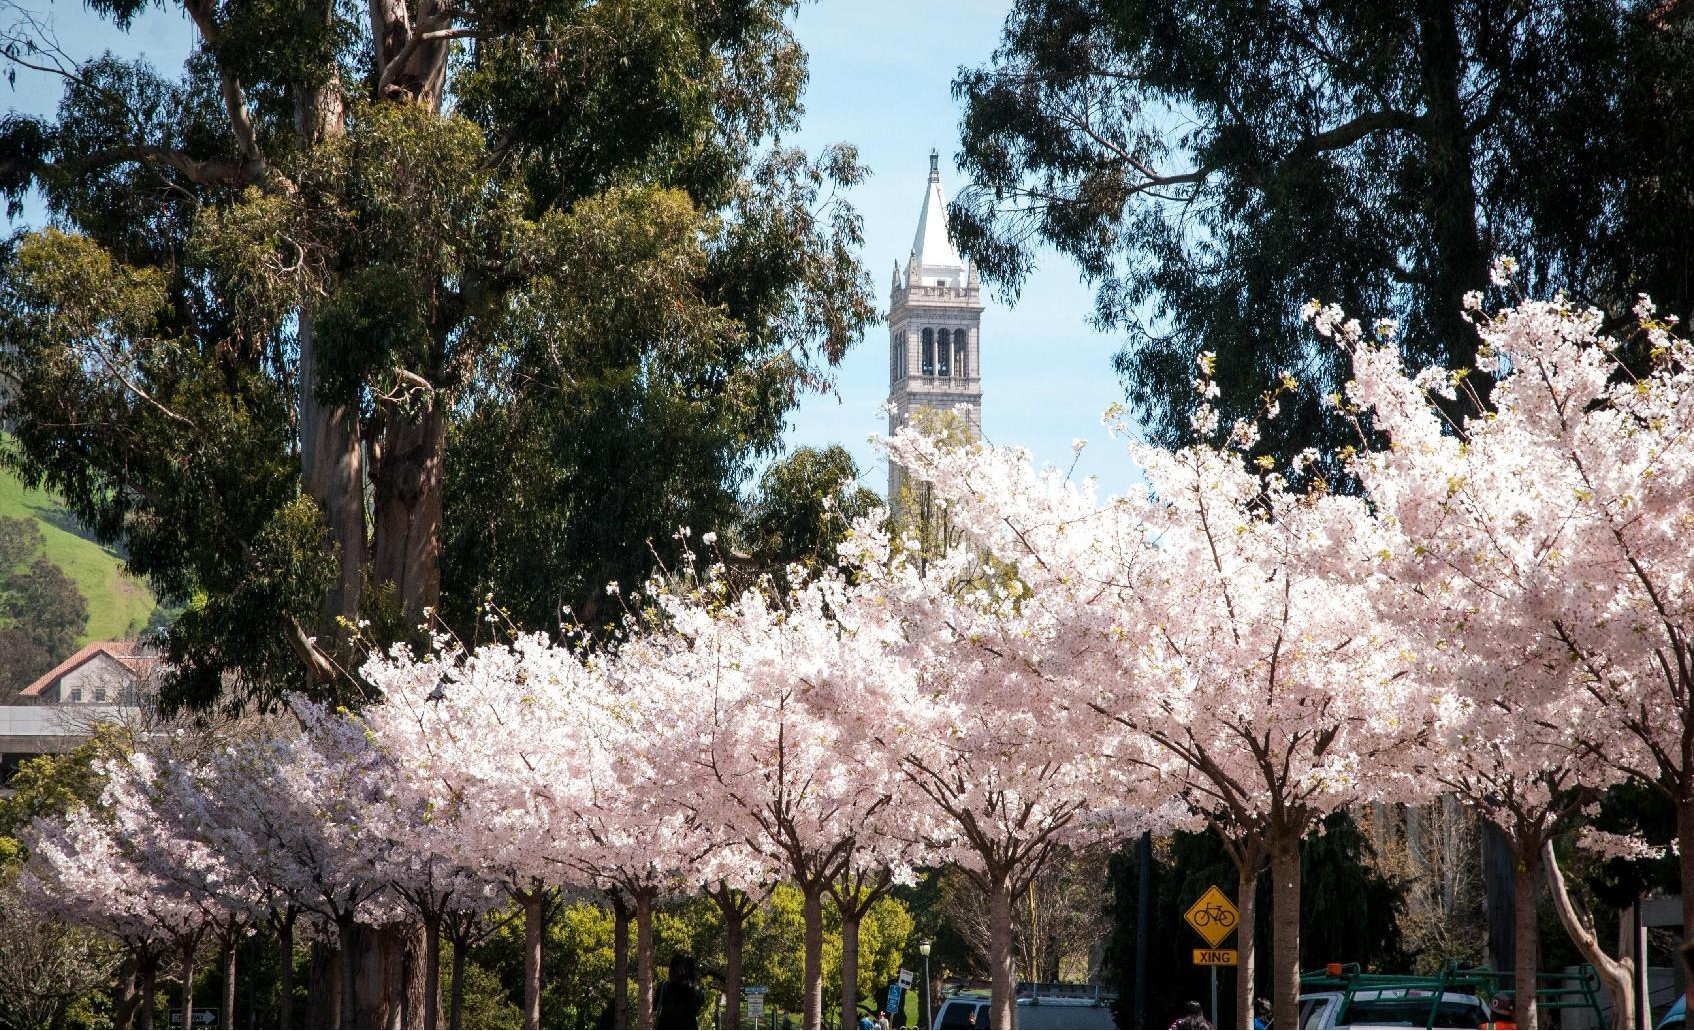 View of Sather Tower in background with blooming flower trees in foreground on UC Berkeley campus